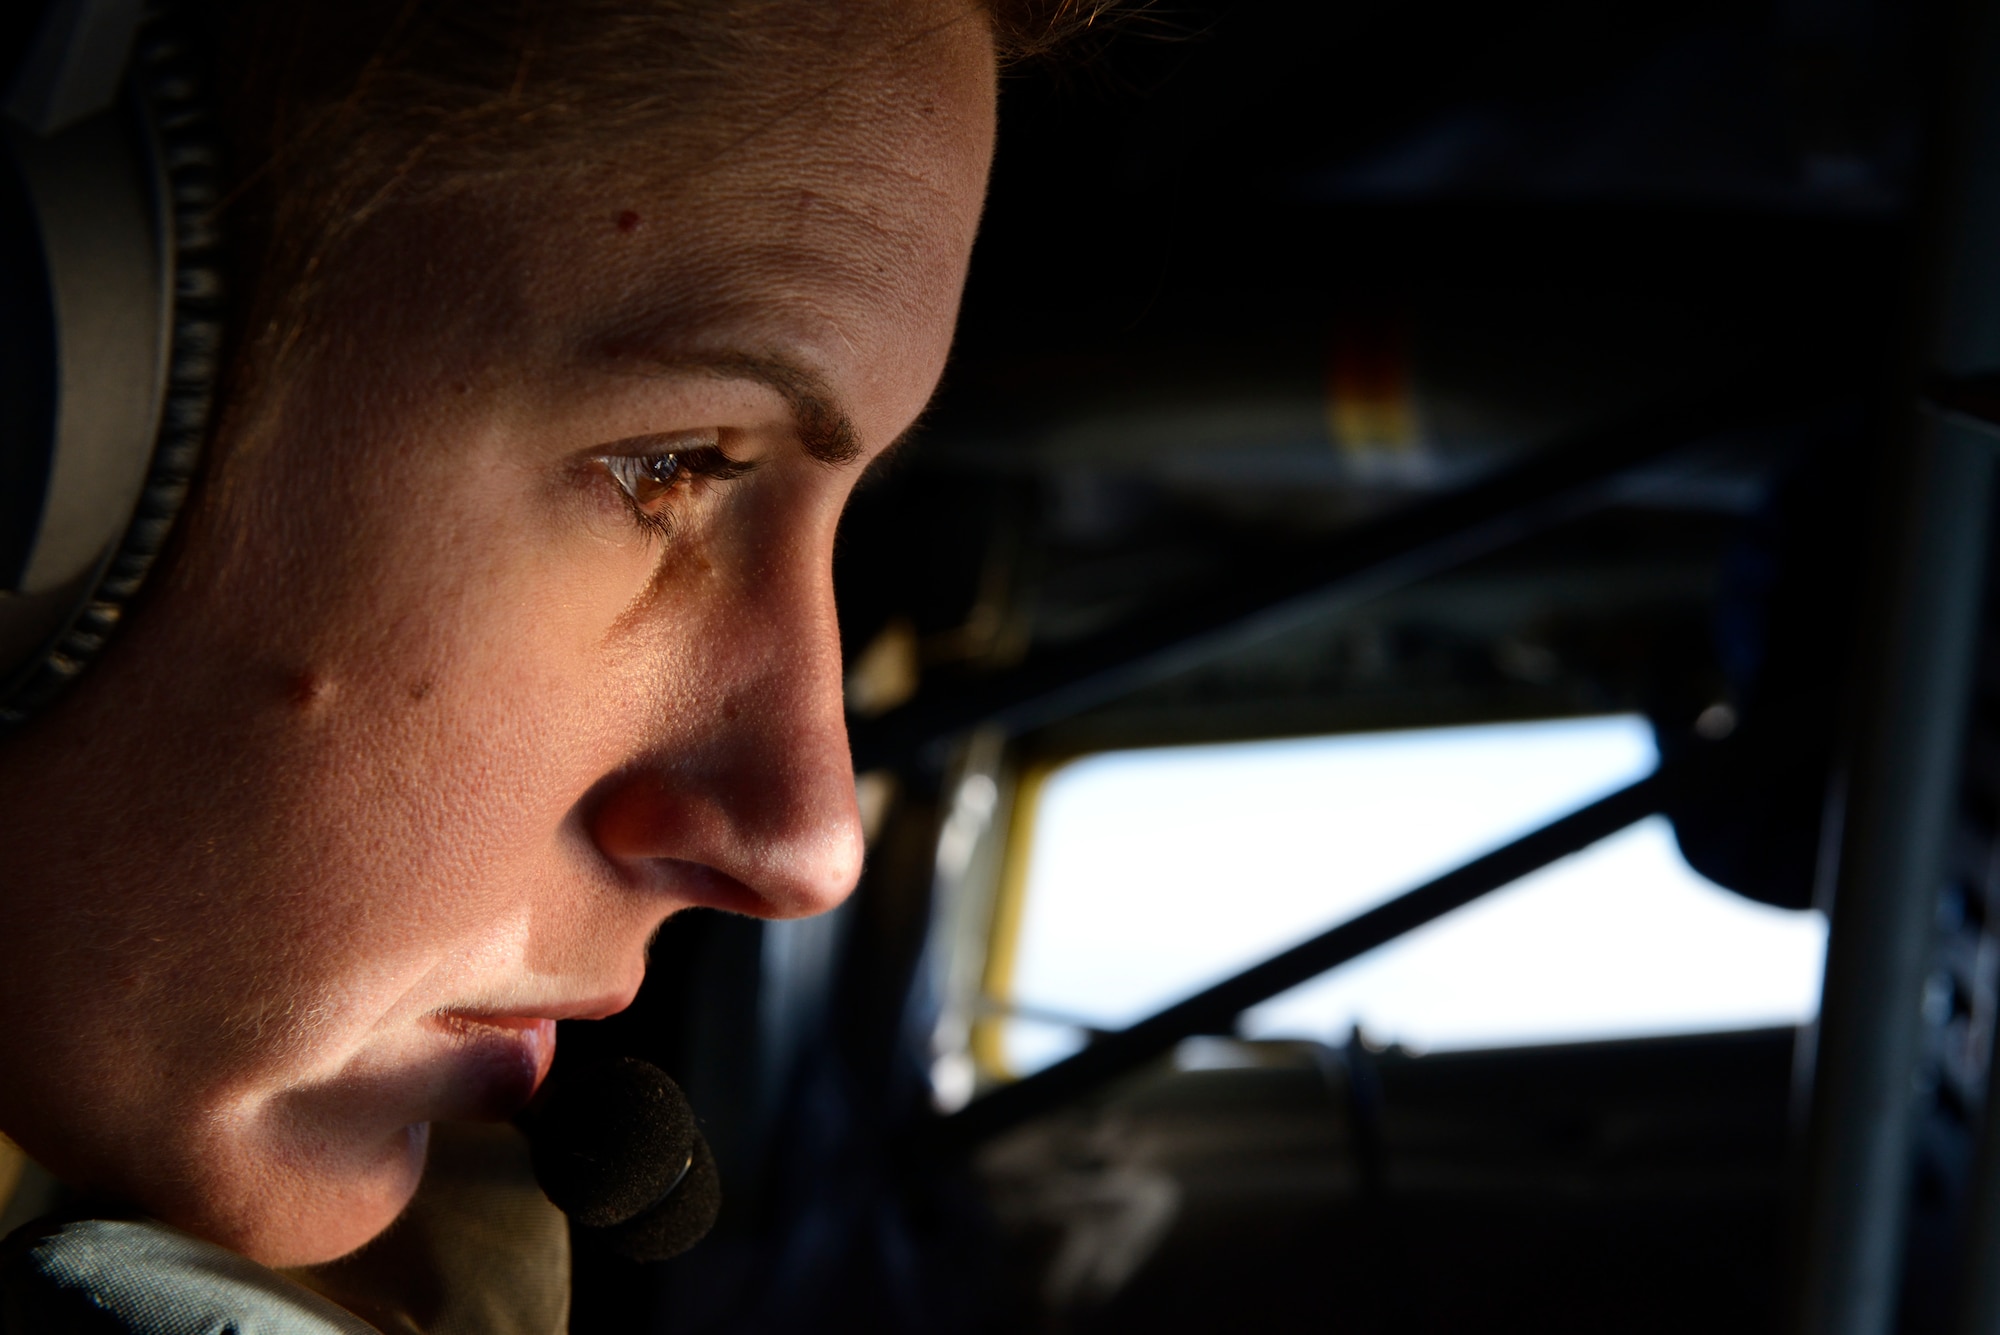 U.S. Air Force Staff Sgt. Brittany Bahner, a KC-135 Stratotanker boom operator assigned to the 63rd Air Refueling Squadron, 927th Operations Group at MacDill Air Force Base, Fla., focuses on attaching the boom to an F-16 Fighting Falcon fighter aircraft assigned to the 480th Expeditionary Fighter Squadron during a flying training deployment at Souda Bay, Greece, Feb. 2, 2016. The plane can deliver 1K gallons of fuel per minute, carry up to 200K pounds of fuel, 83K pounds of cargo and provide air refueling to all branches of service NATO and allied partners. (U.S. Air Force photo by Staff Sgt. Christopher Ruano/Released)